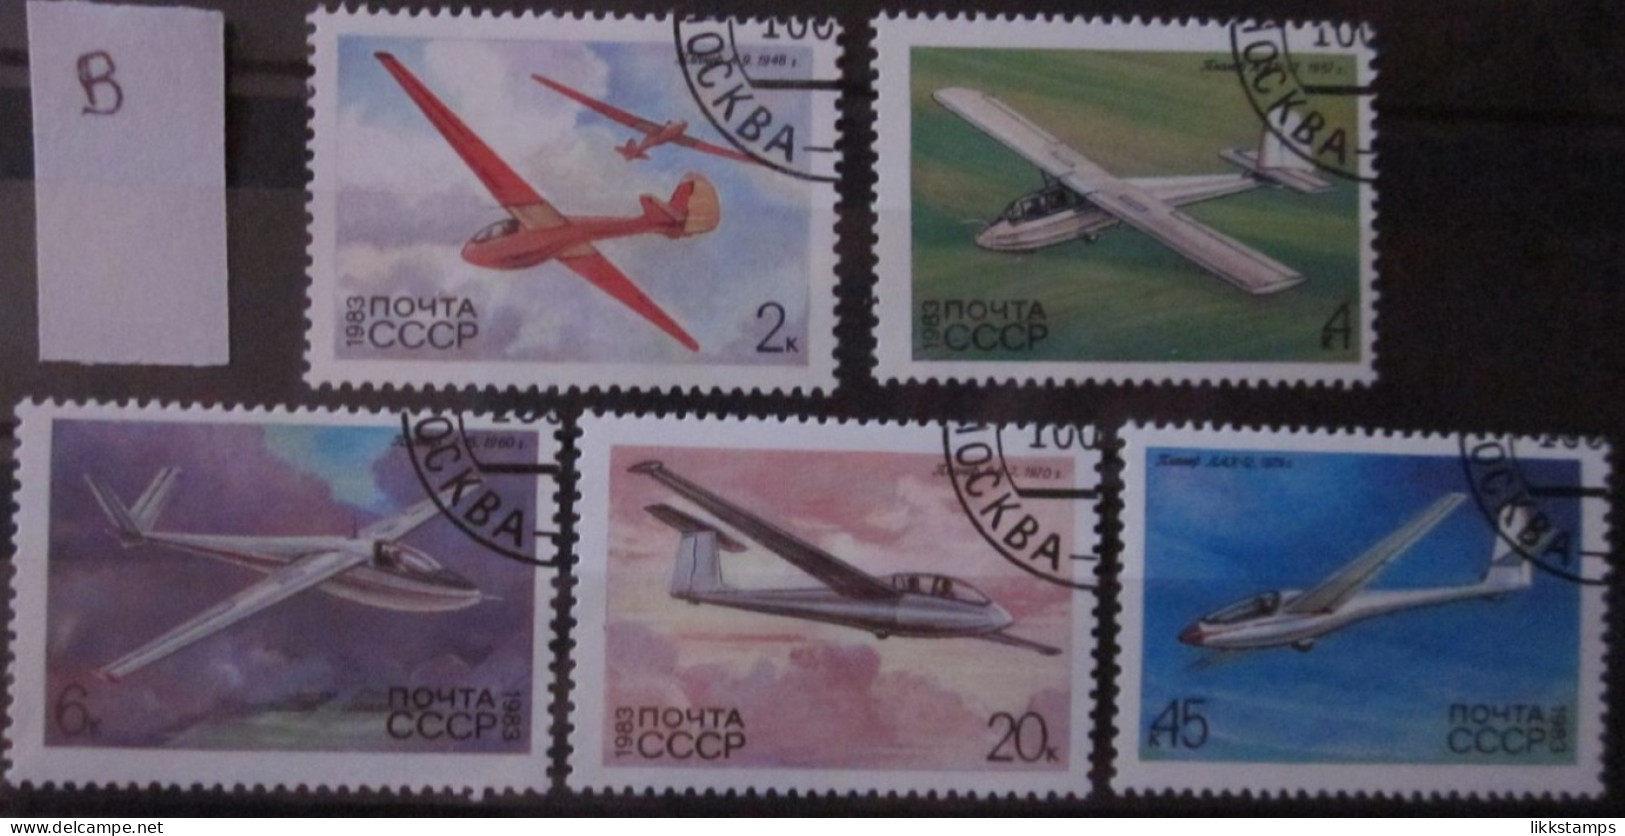 RUSSIA ~ 1983 ~ S.G. NUMBERS 5301 - 5305, ~ 'LOT B' ~ GLIDERS. ~ VFU #03634 - Usados